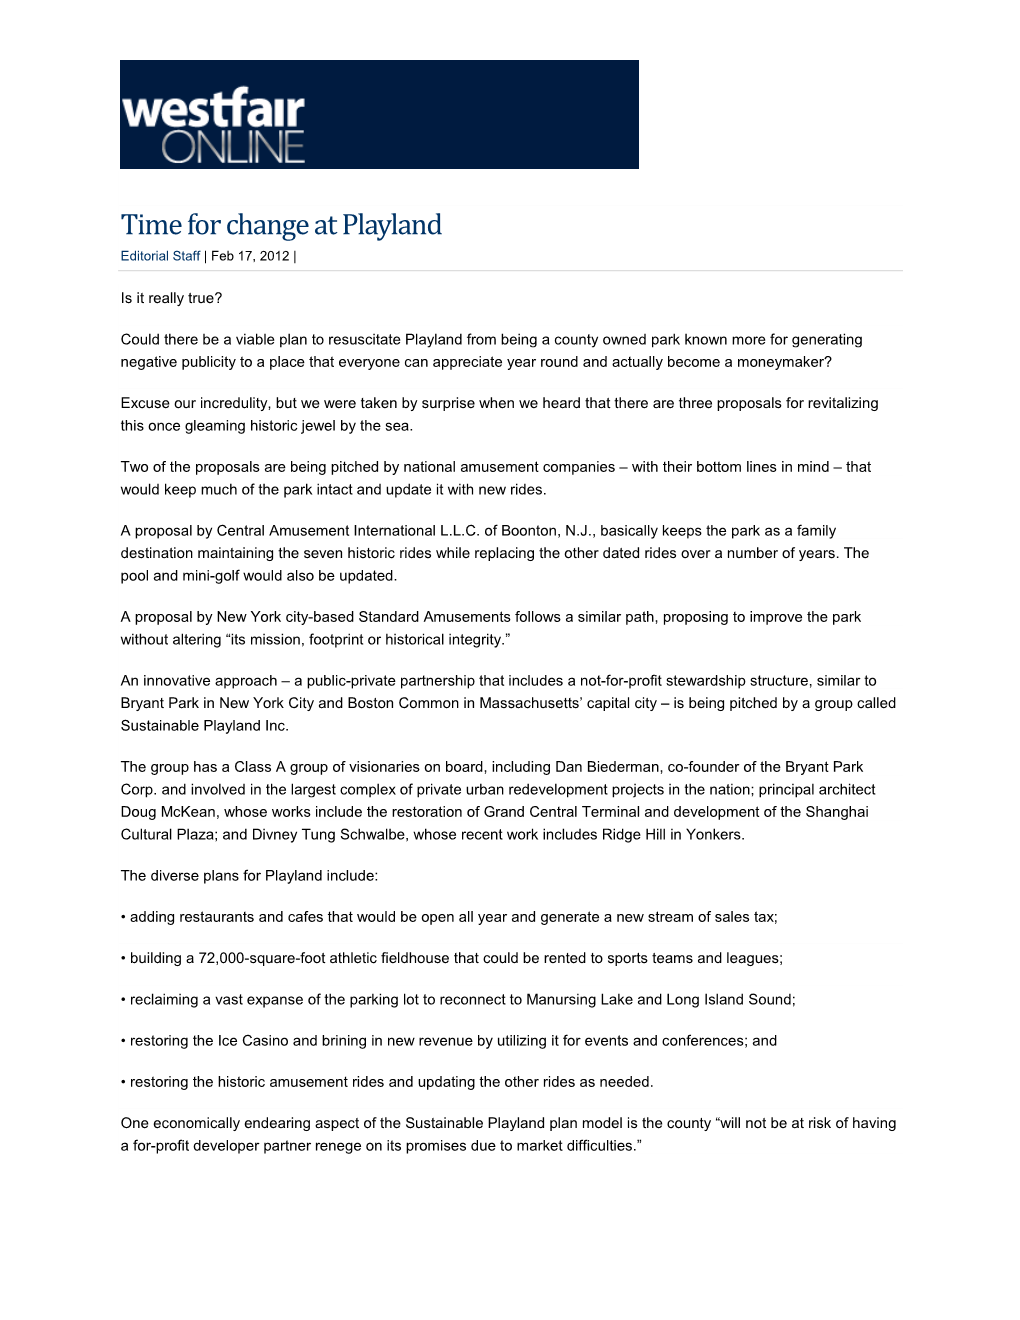 Time for Change at Playland Editorial Staff | Feb 17, 2012 |